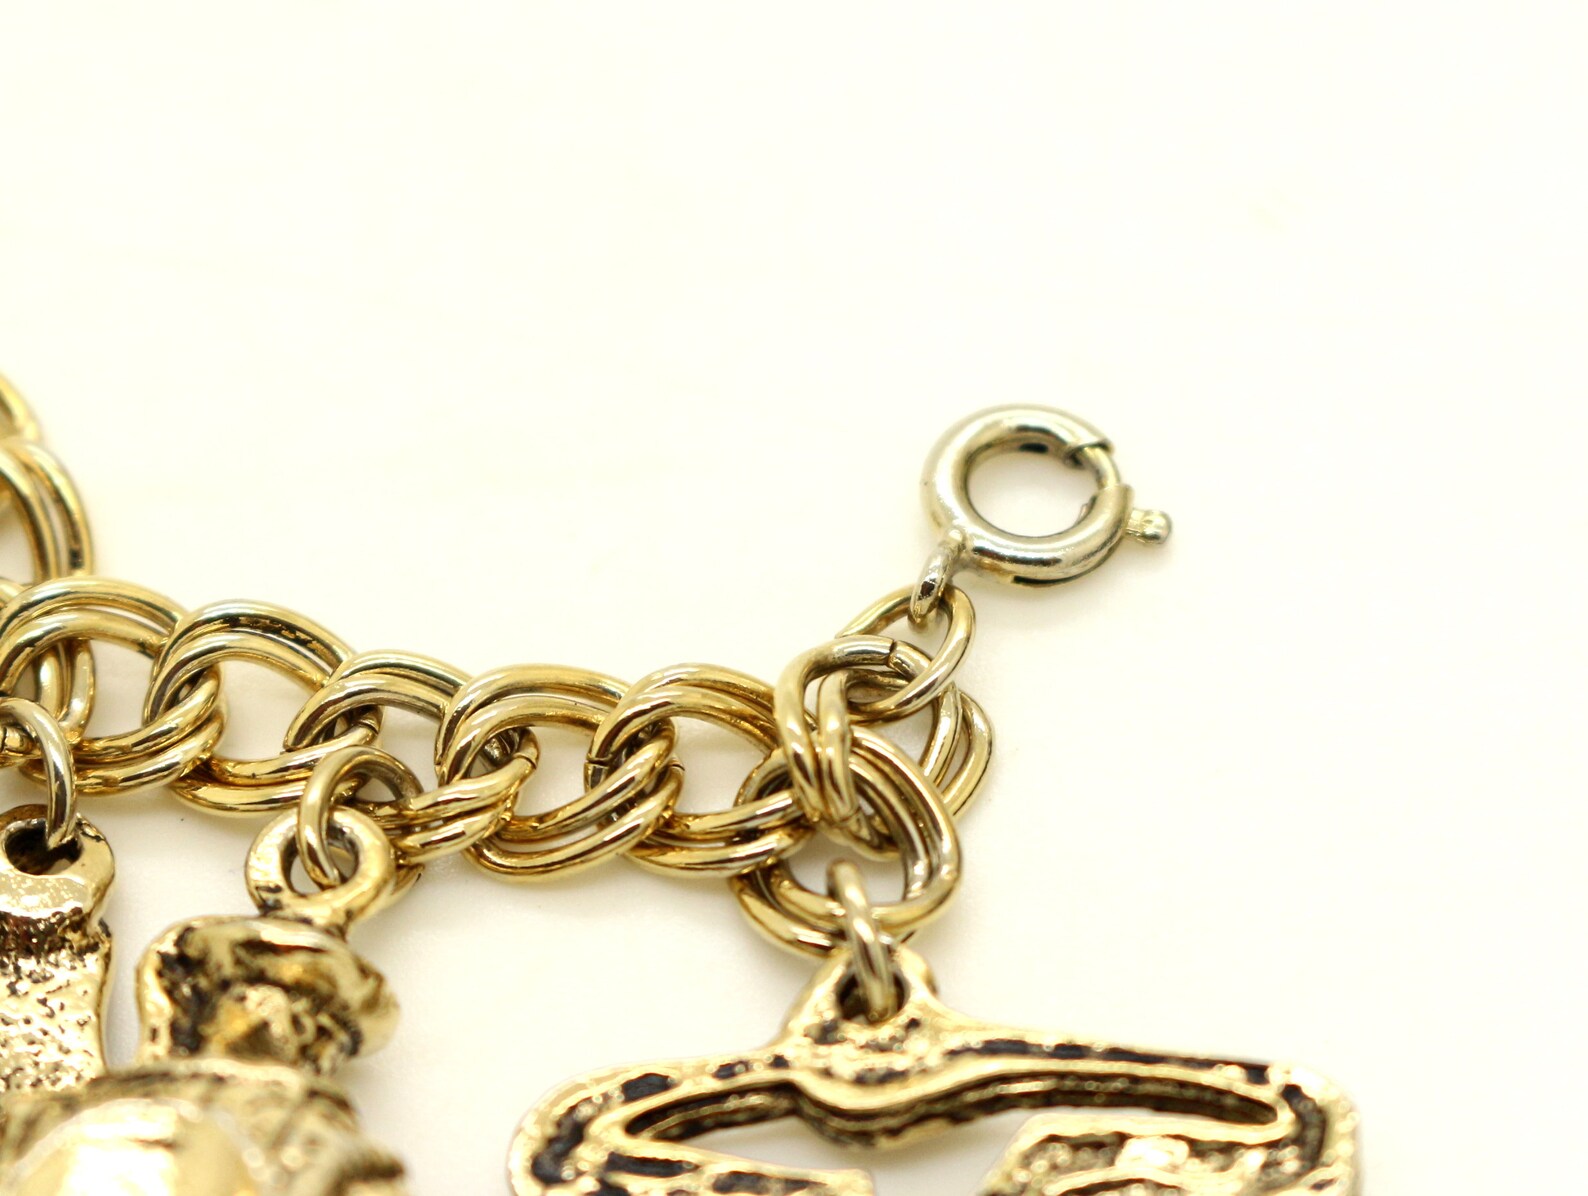 JEWELCRAFT Chinese Good Luck Charm Gold Tone Bracelet 7inch - Etsy